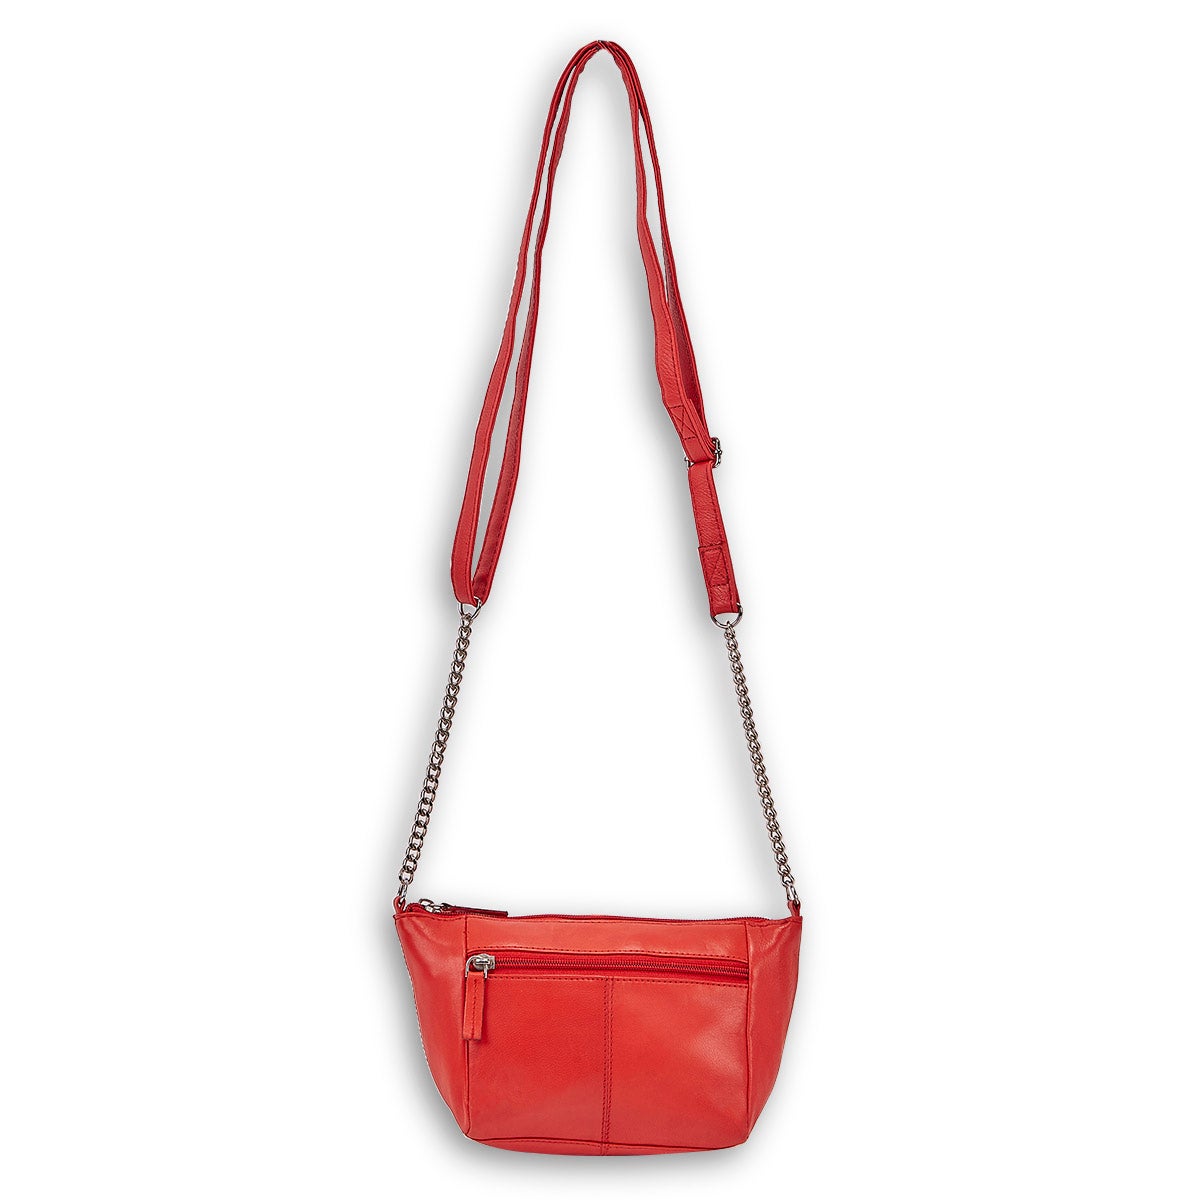 Women's 1038 red sheep leather crossbody bag